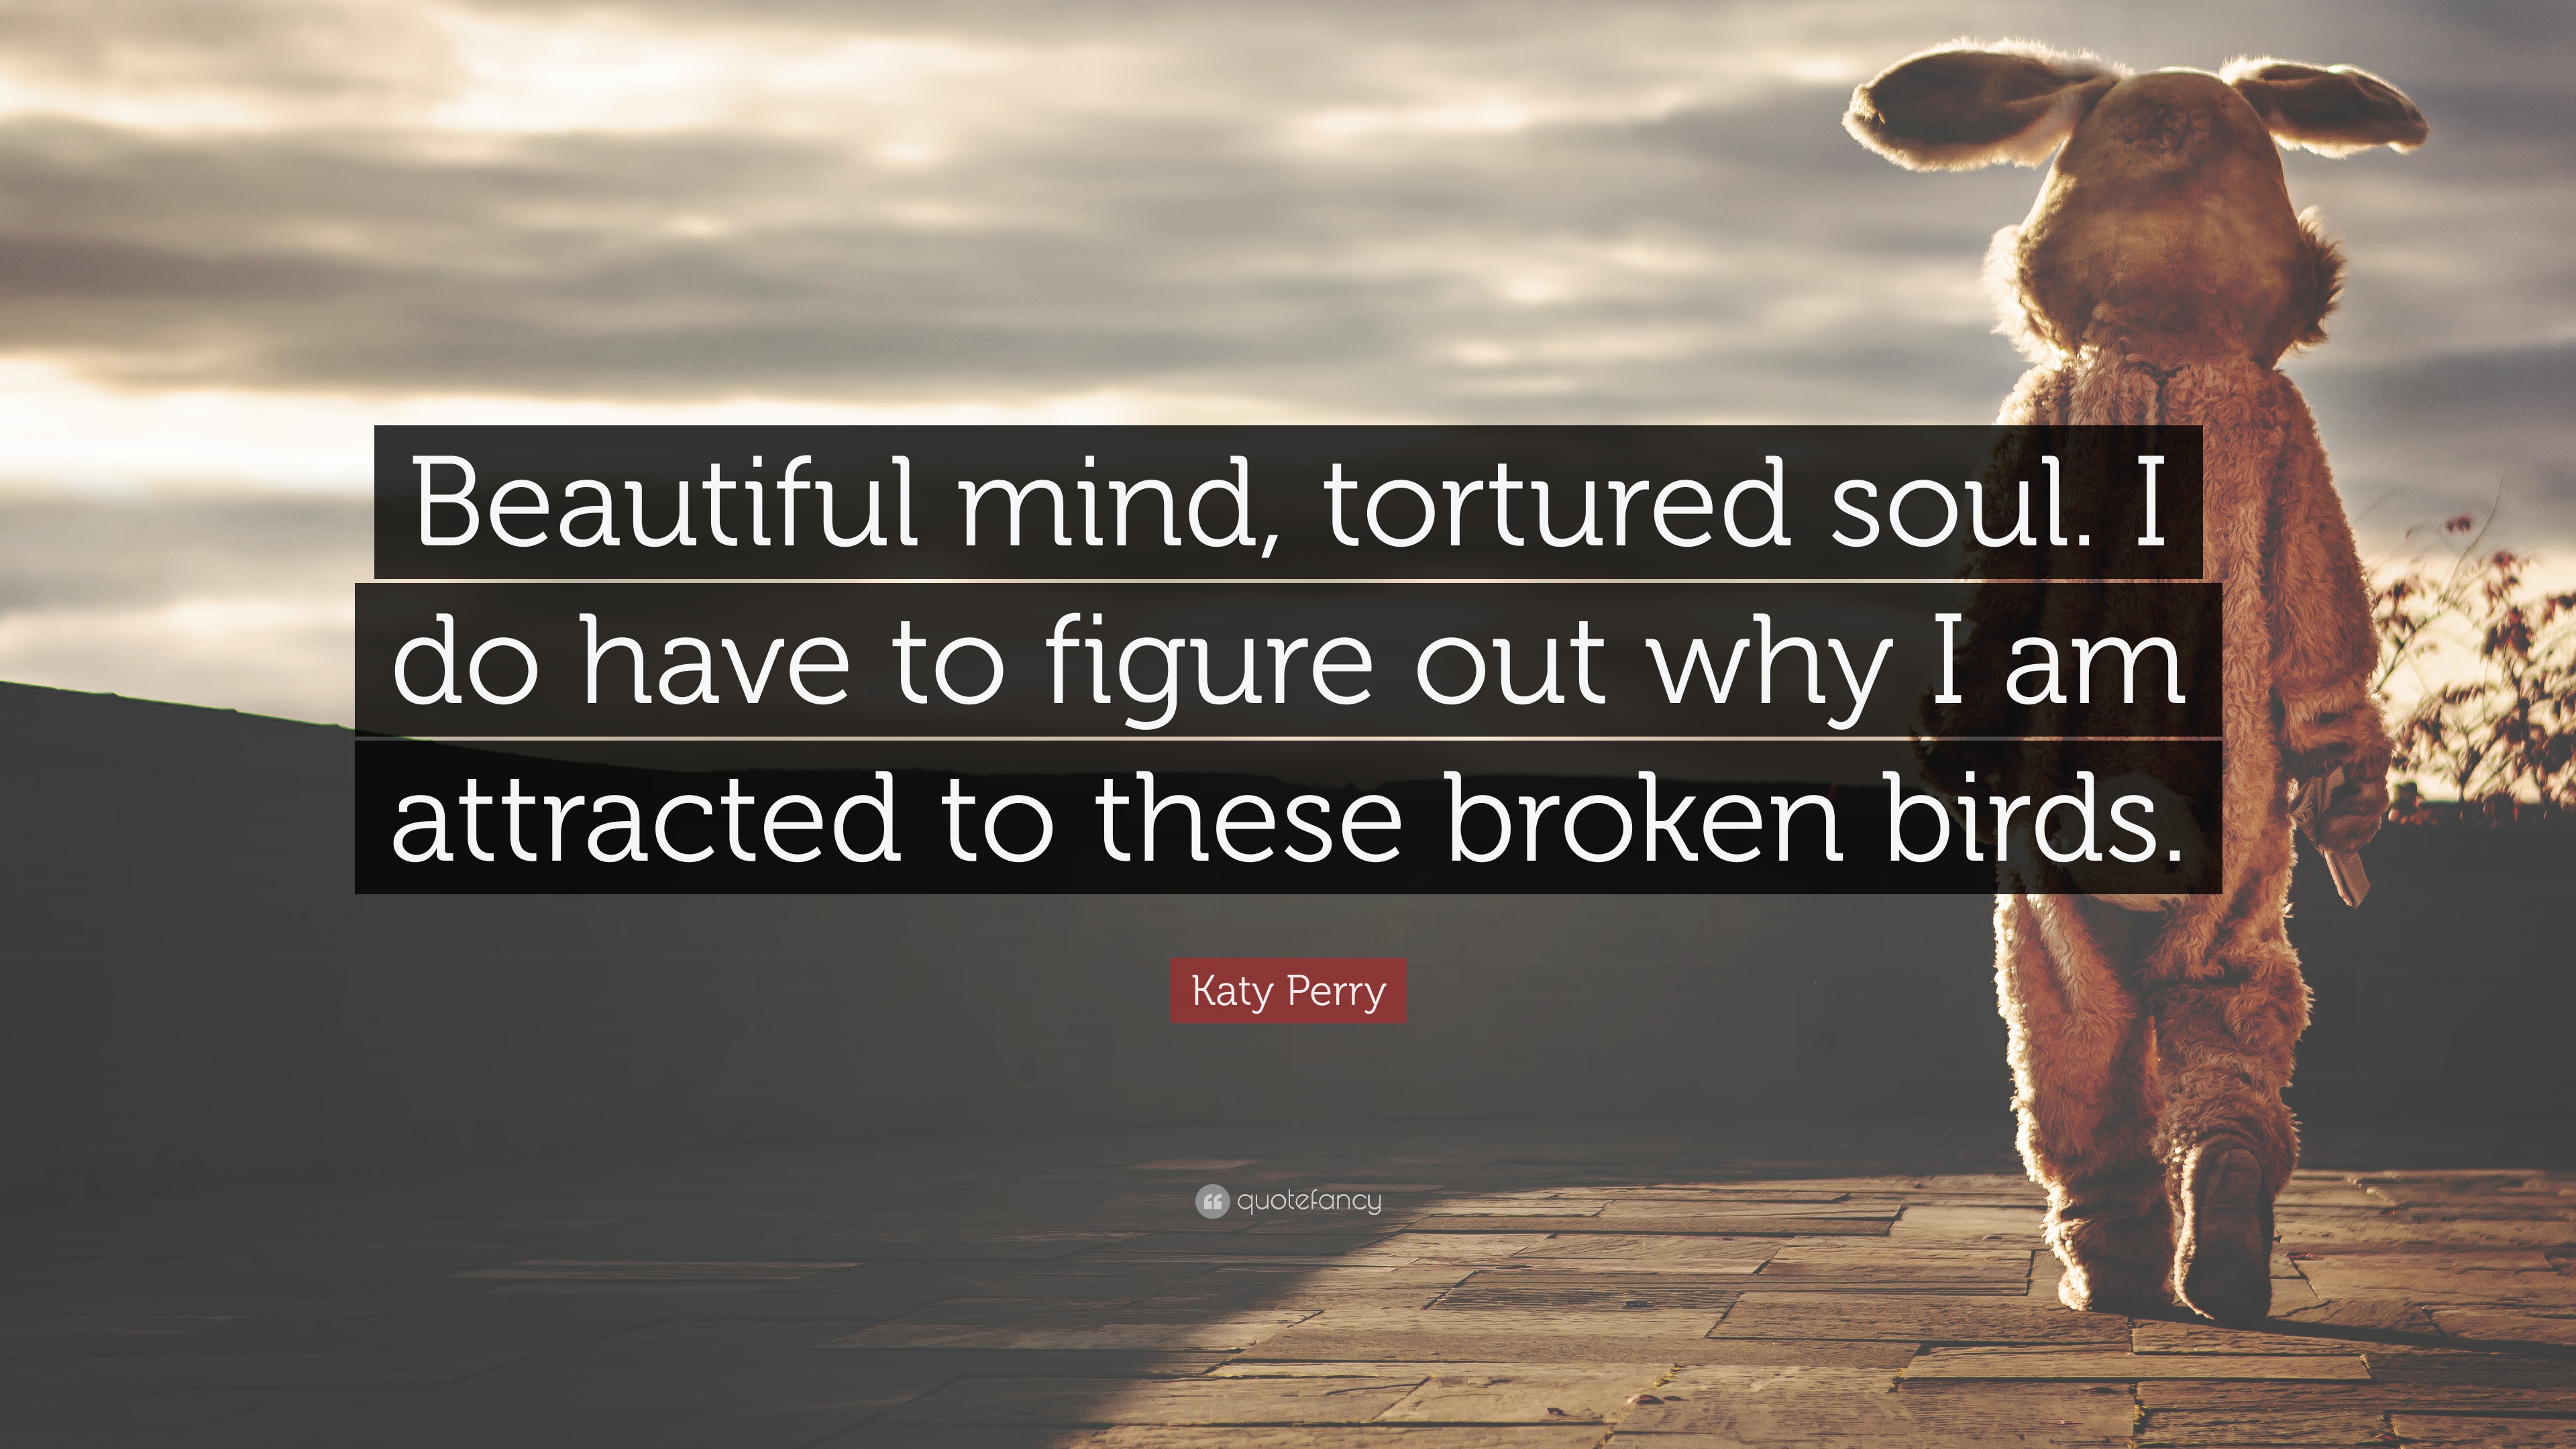 Katy Perry Quote: “Beautiful mind, tortured soul. I do have to